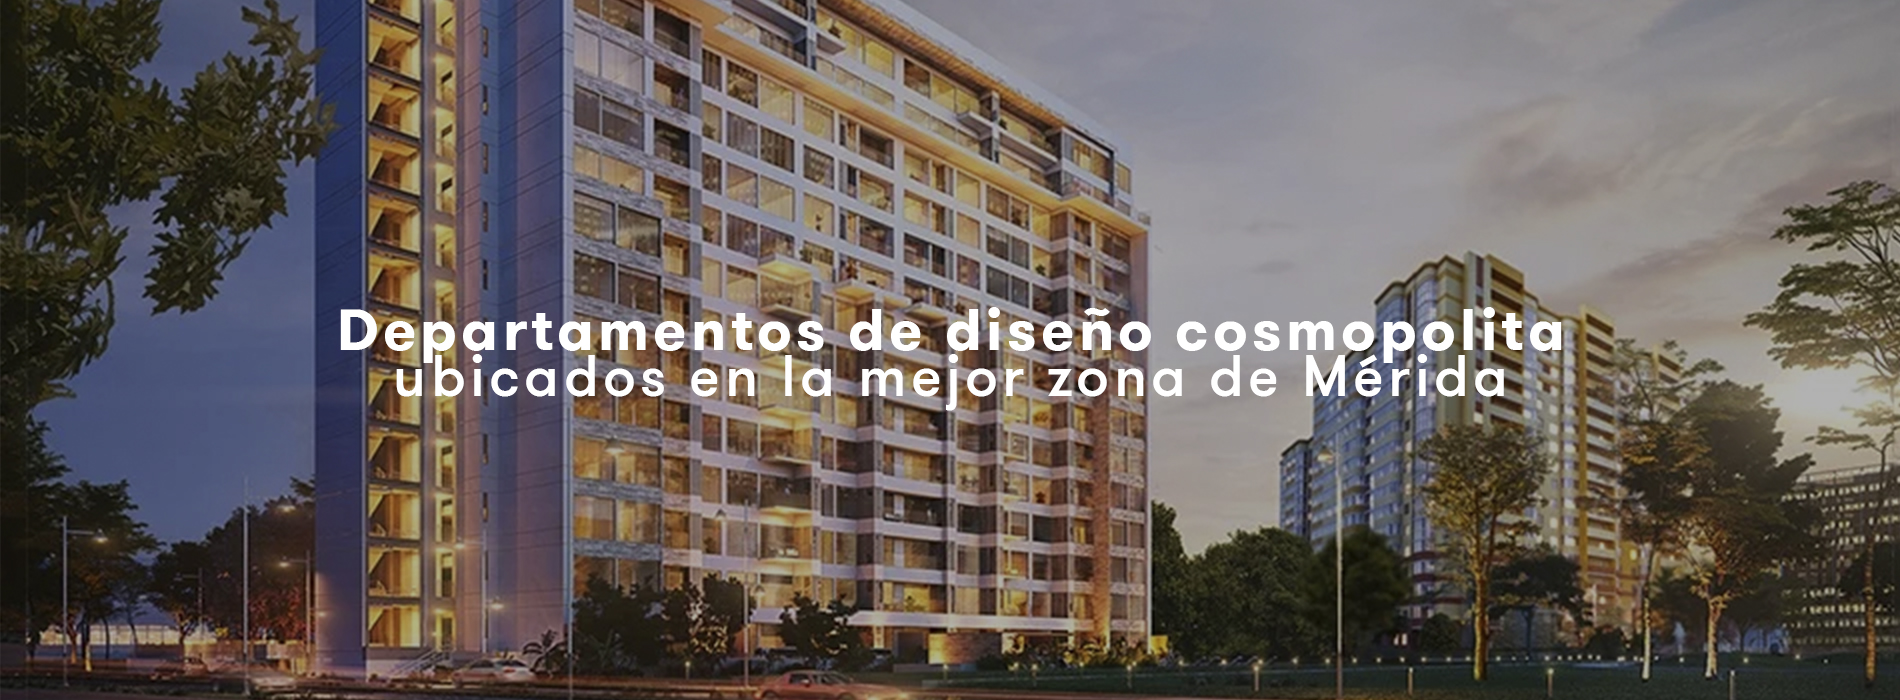 Indico Residencial Goodlers